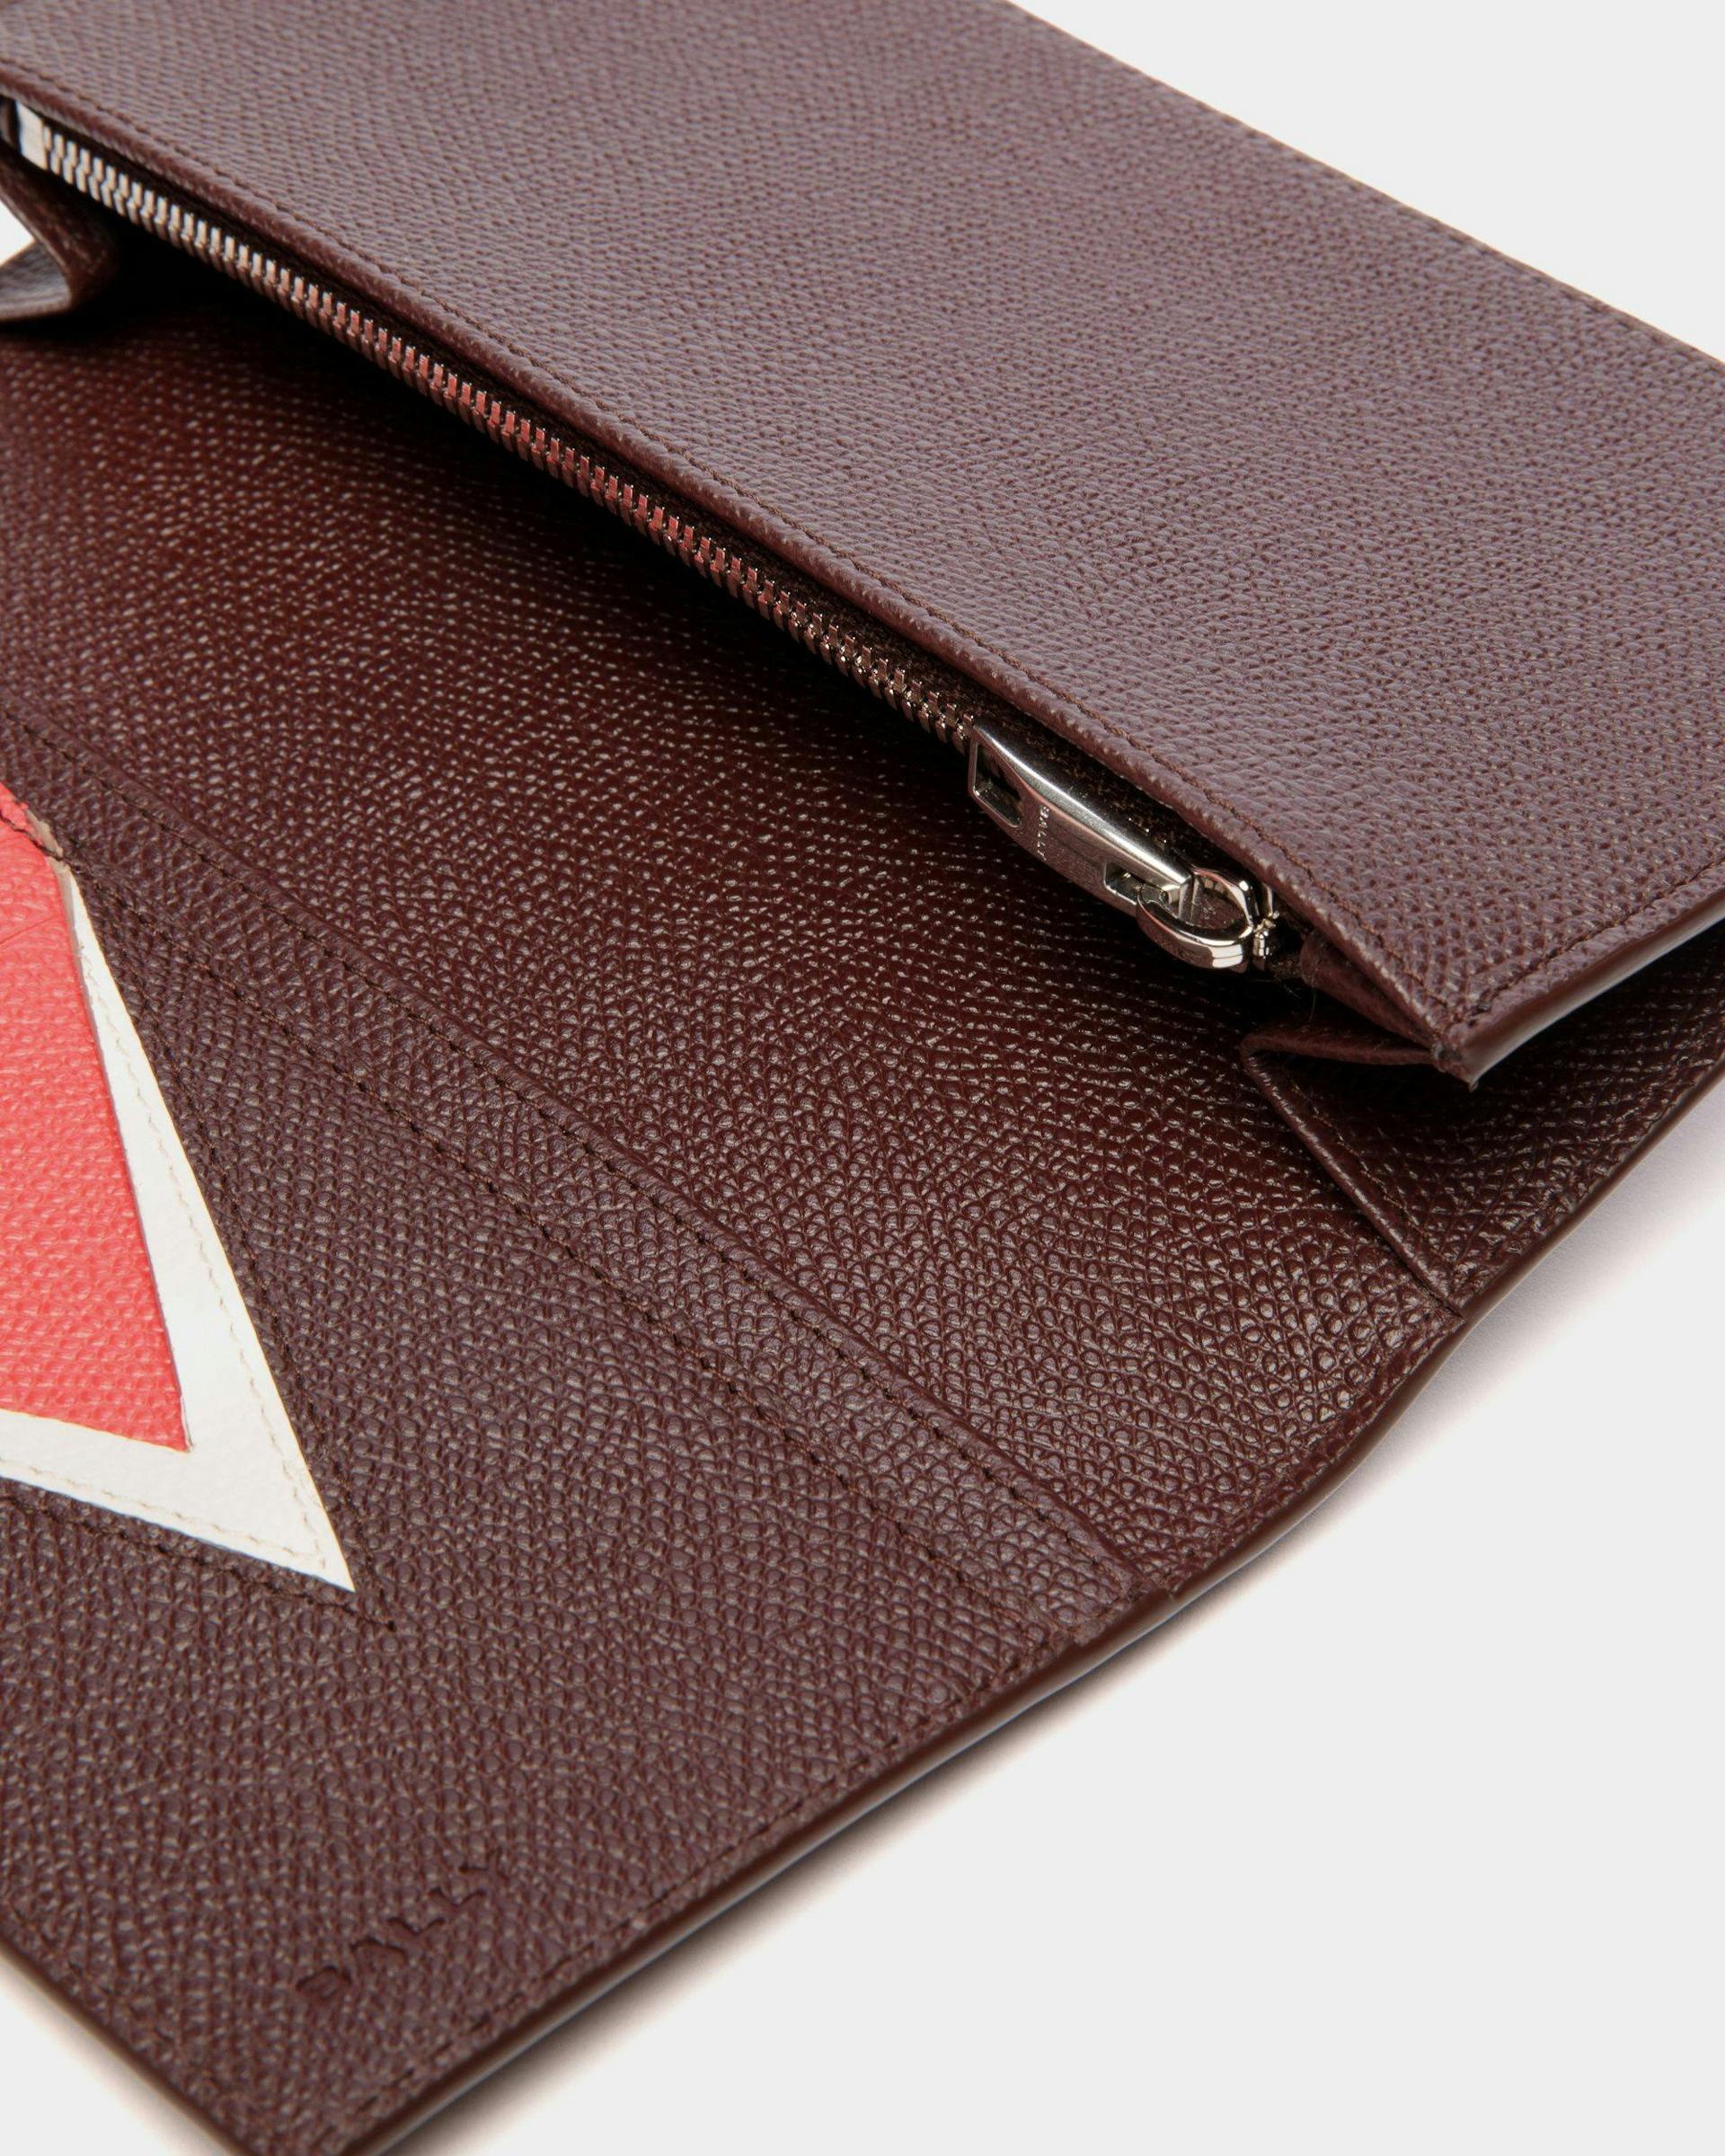 Men's Flag Continental Wallet In Chestnut Brown Grained Leather | Bally | Still Life Detail